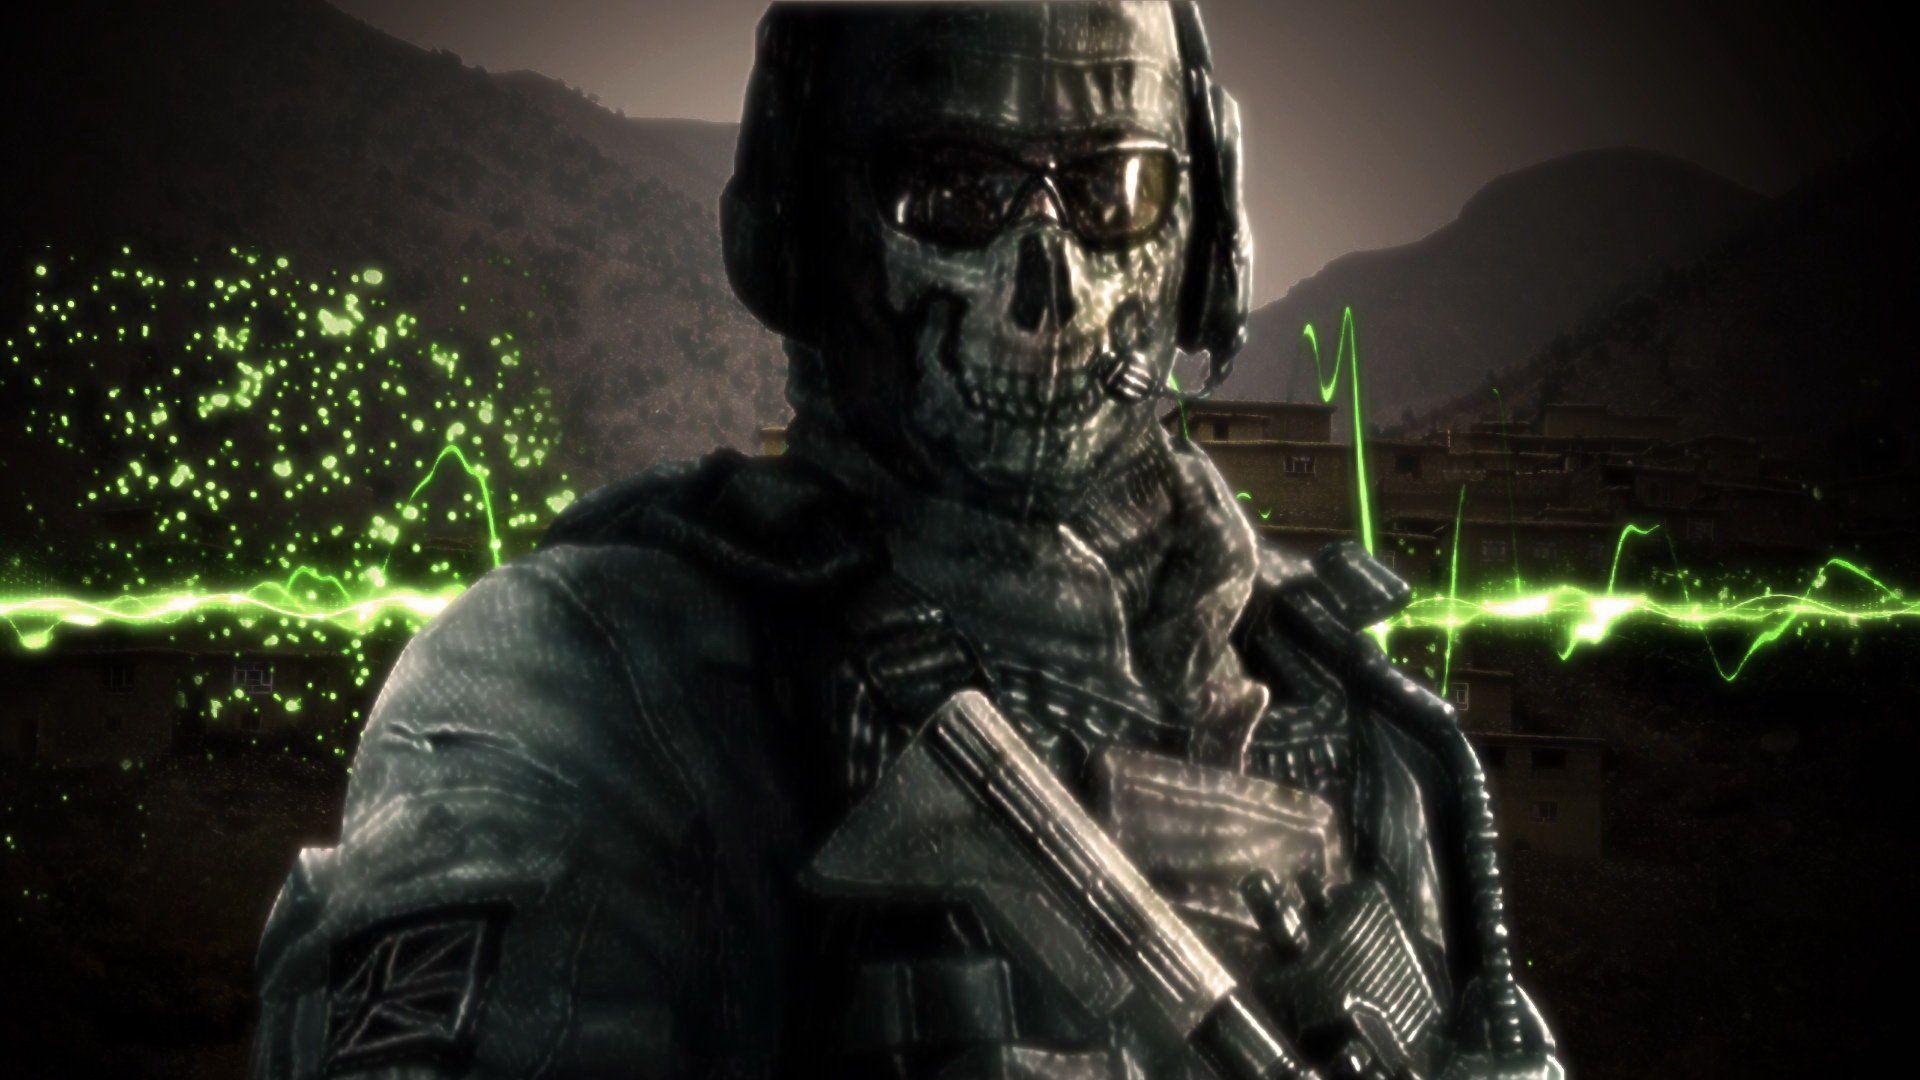 HD wallpaper of Call of Duty Ghosts 1920×1080 Cool Wallpaper